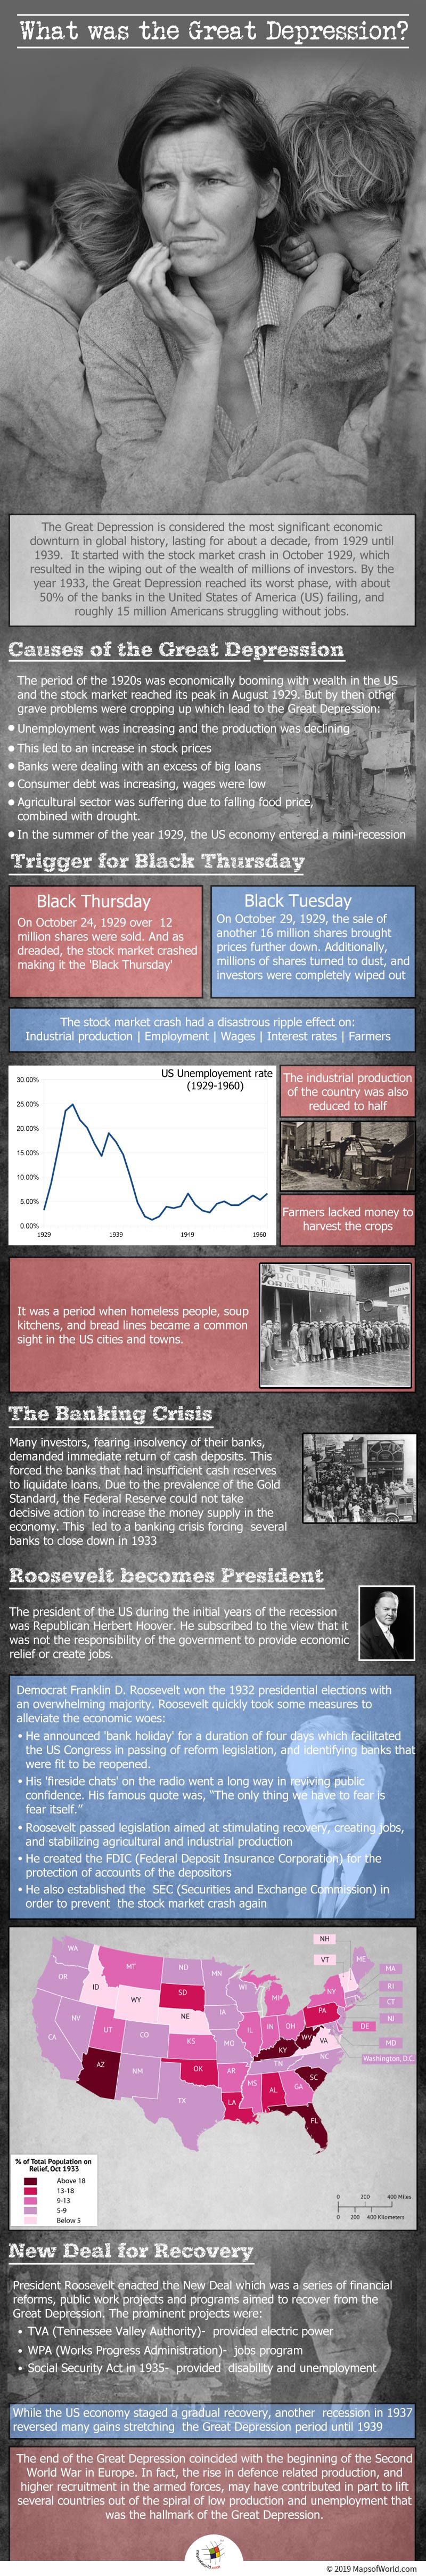 Infographic Giving Details on The Great Depression